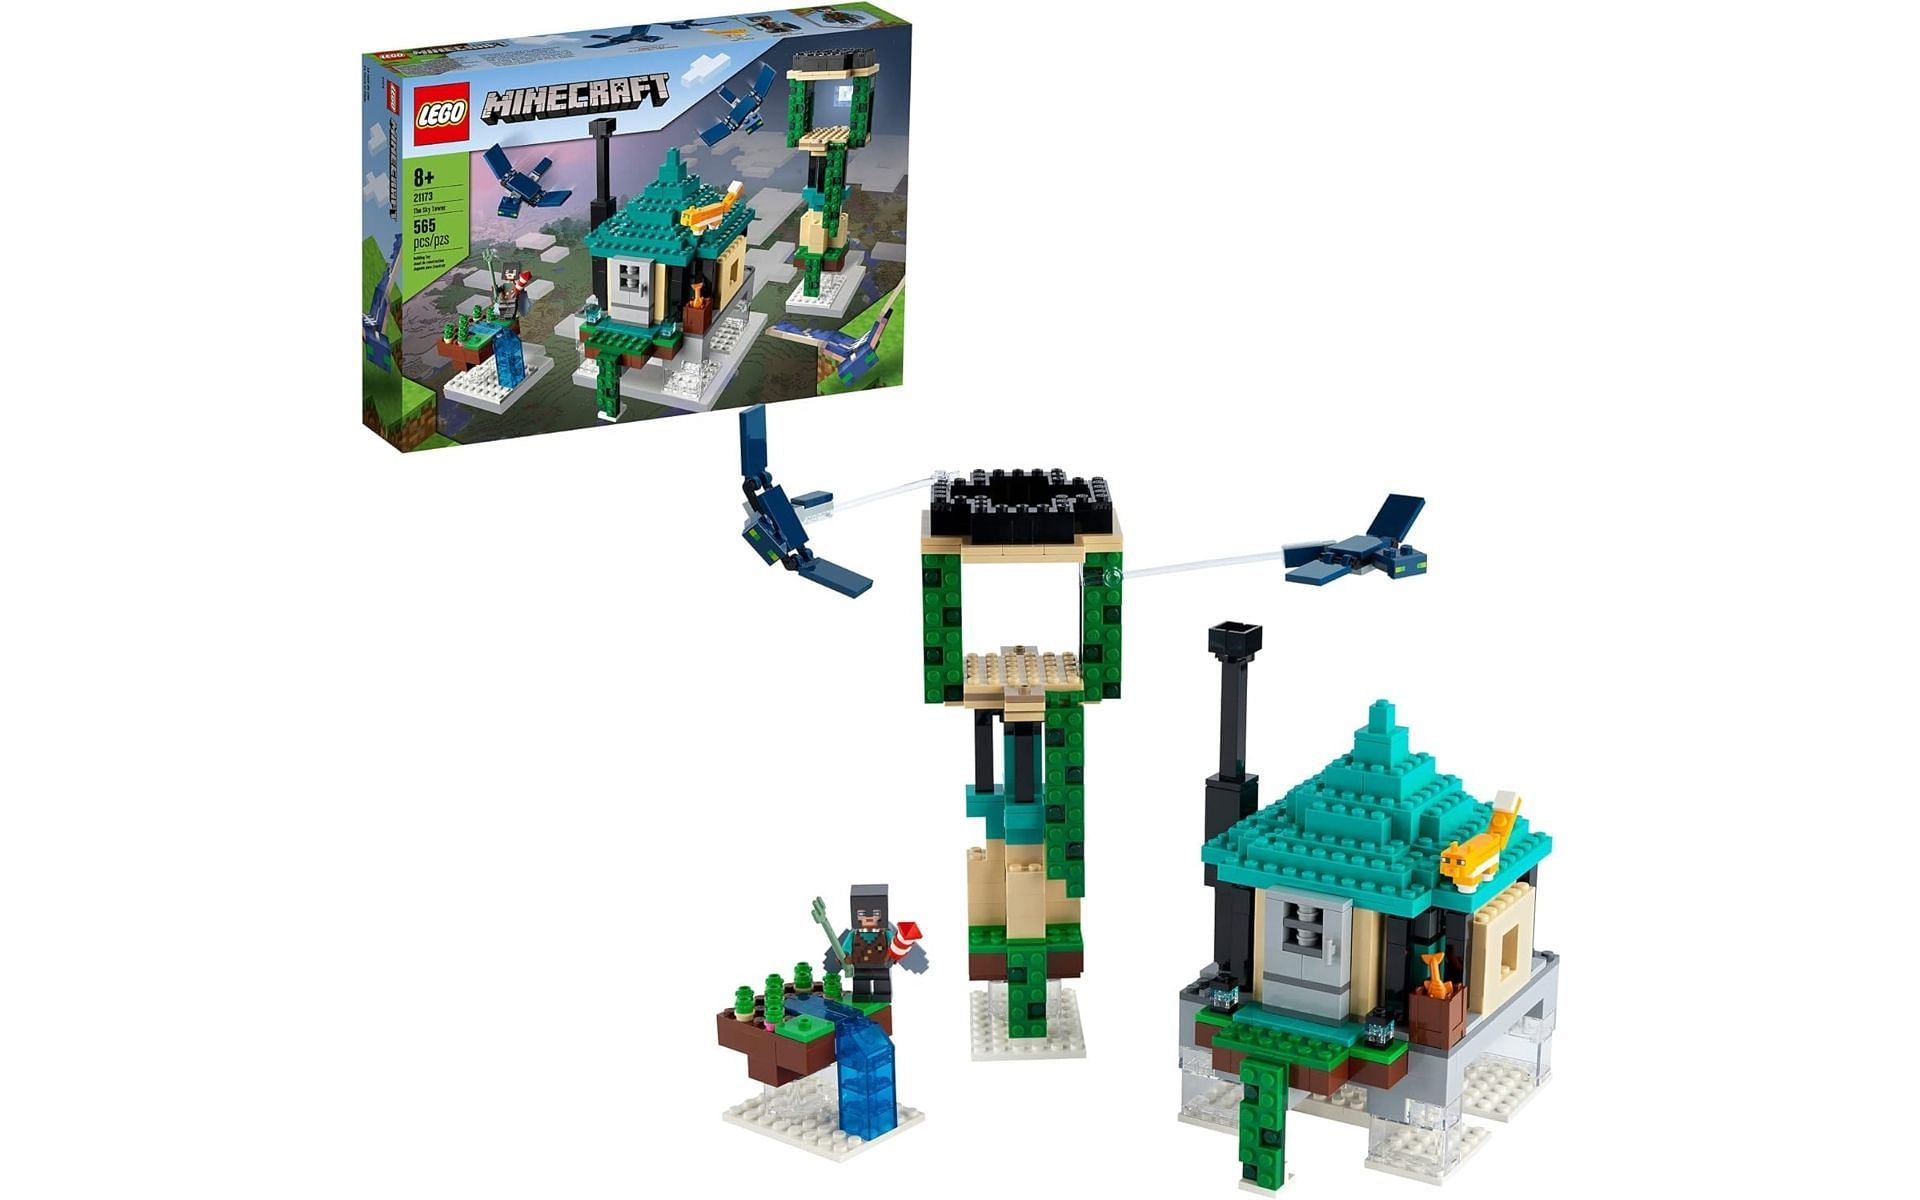 Build a floating tower and house with The Sky Tower LEGO set (Image via Amazon)